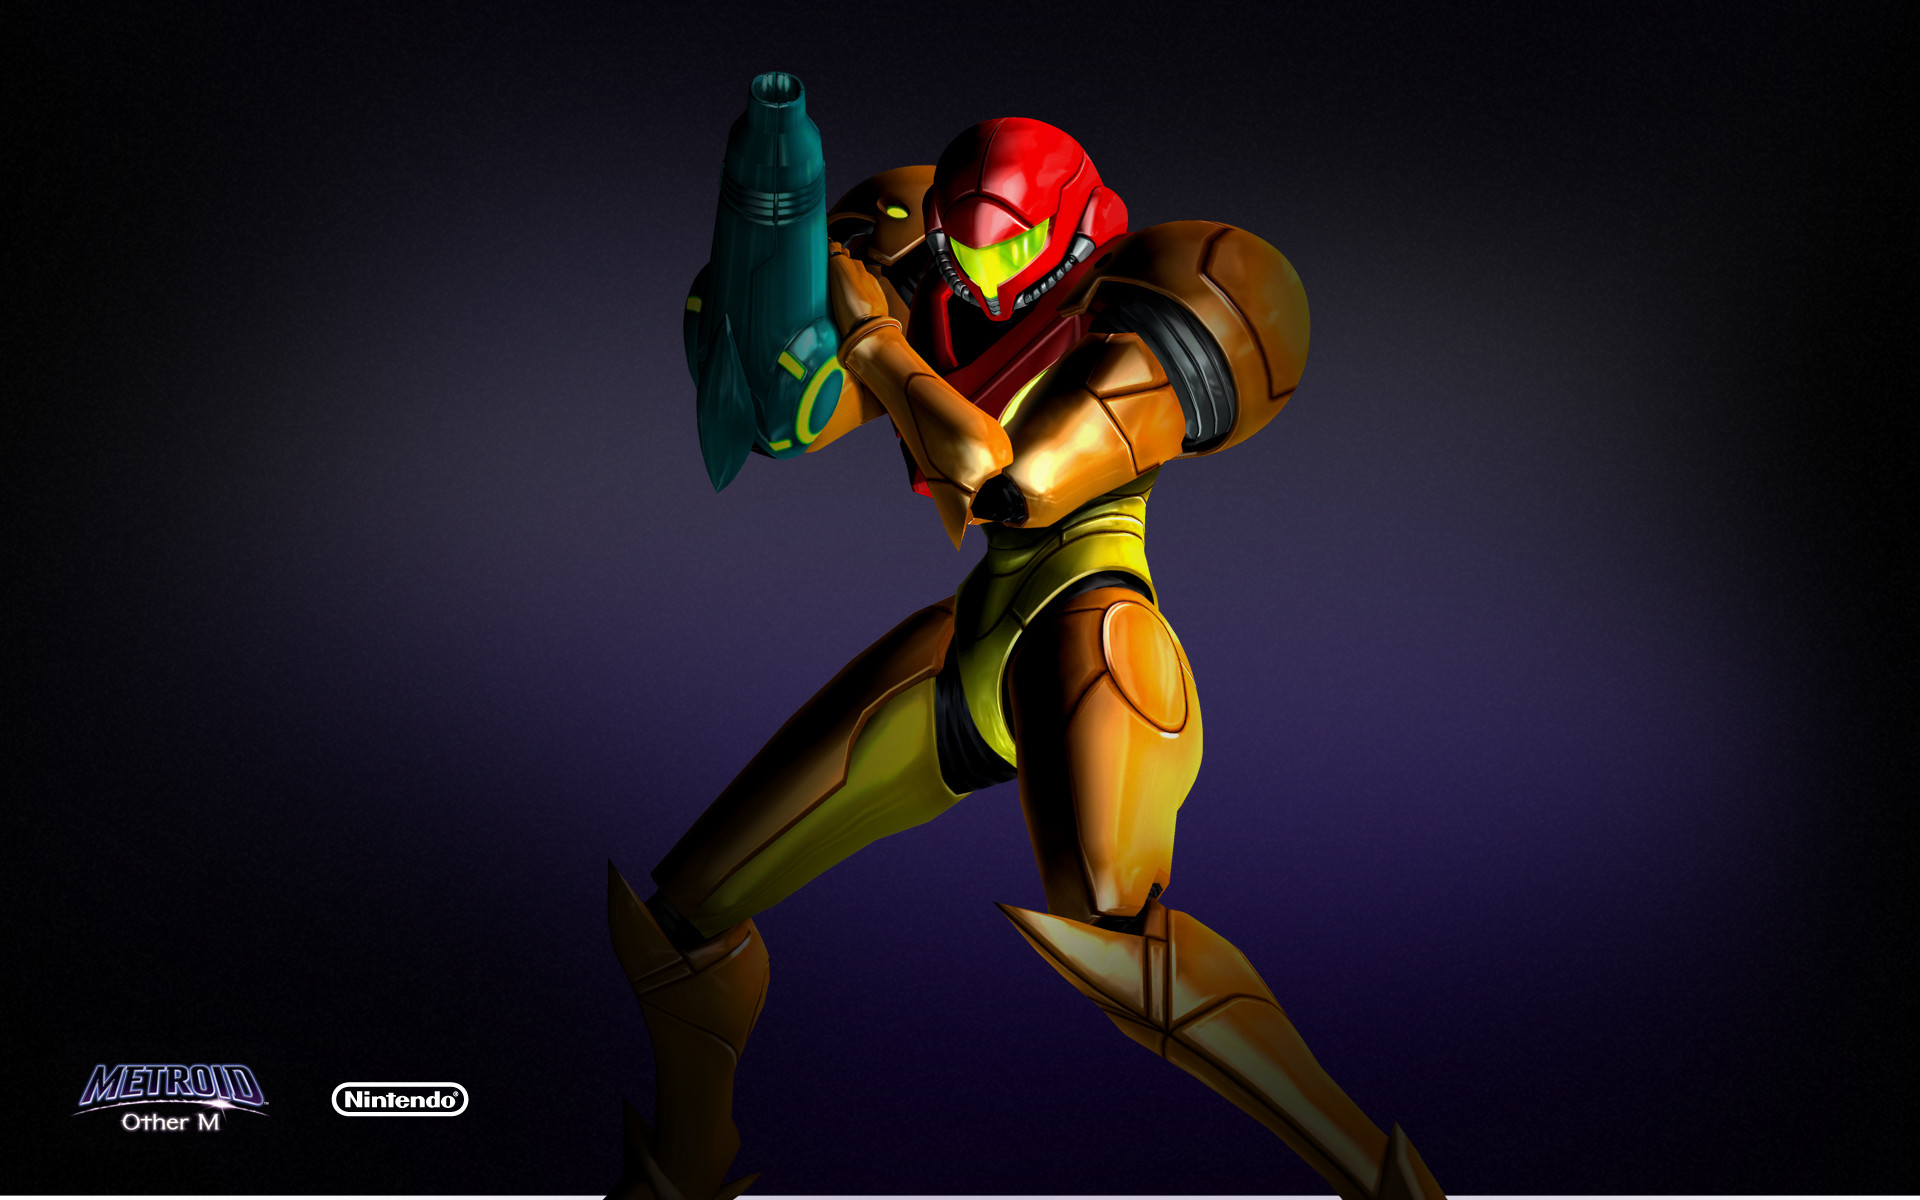 Metroid Other M Wallpaper (72+ images)